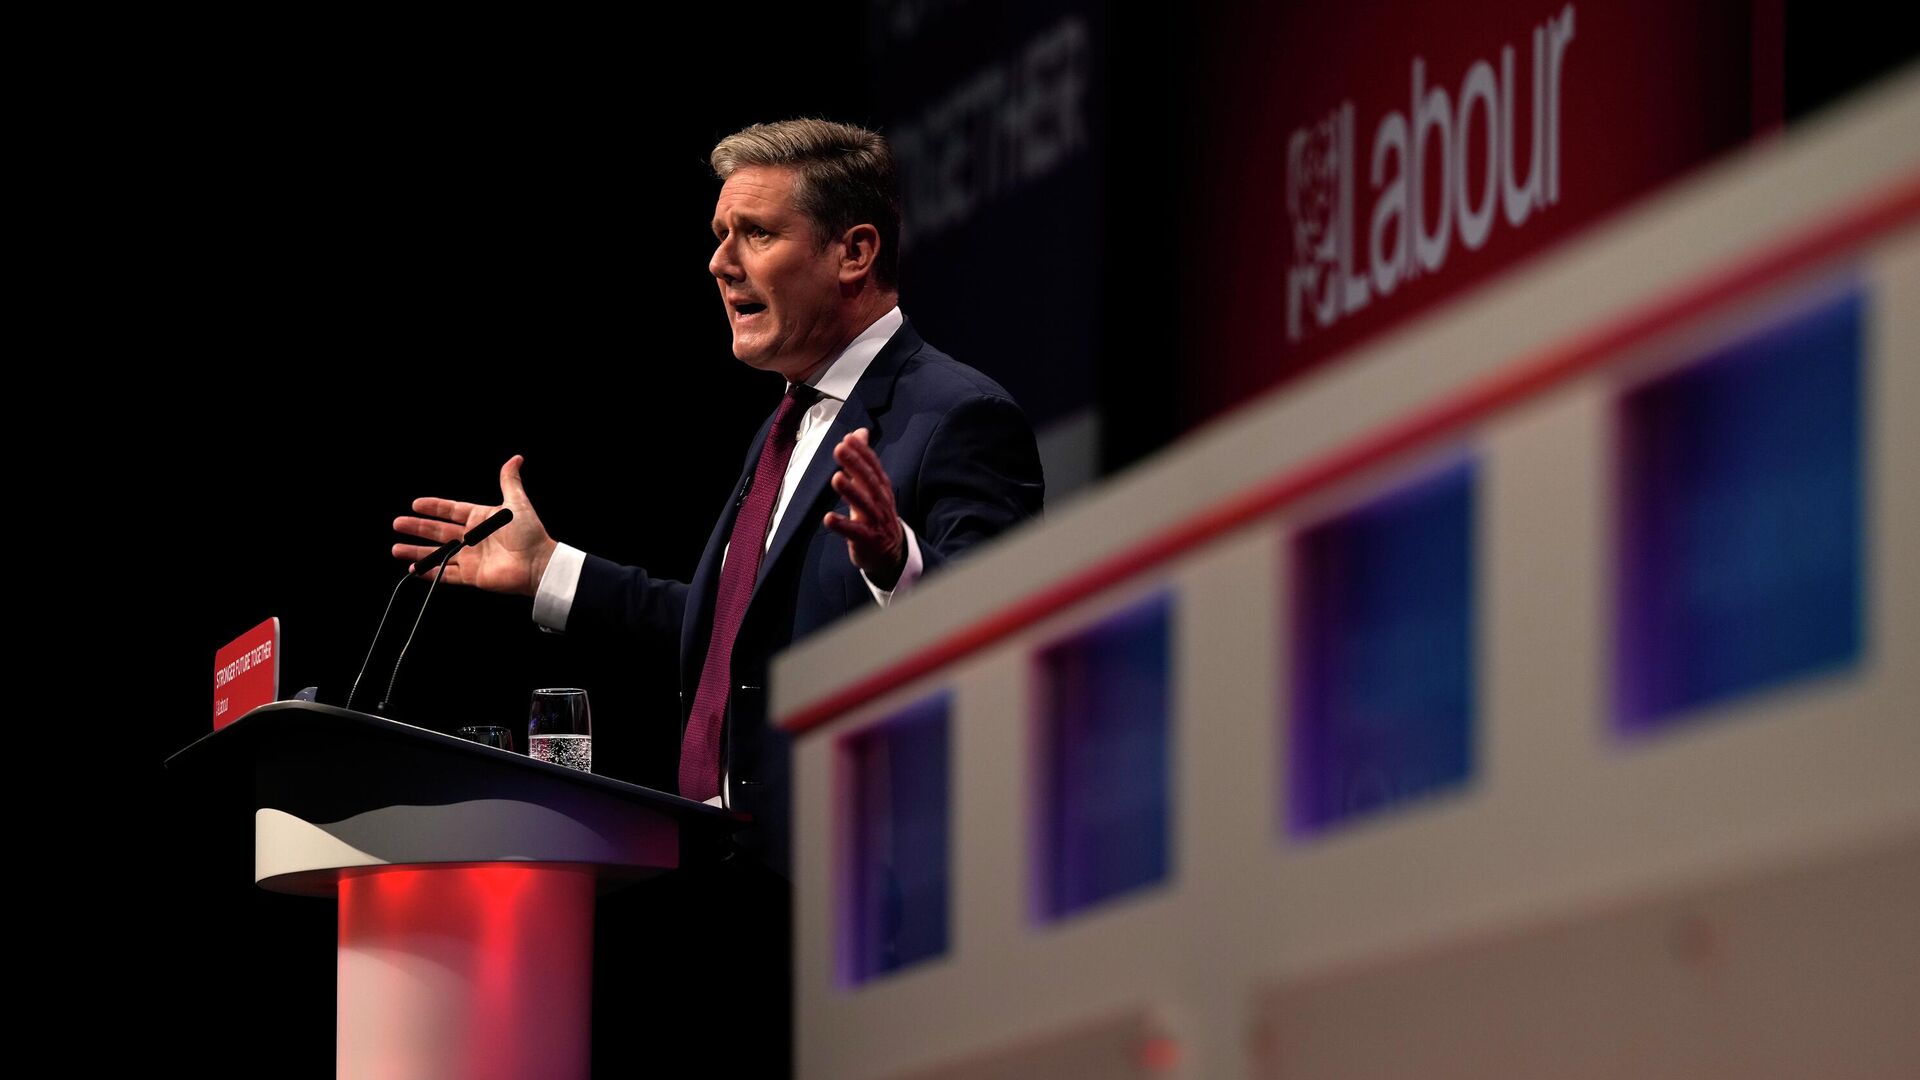 Leader of the British Labour Party Keir Starmer gestures as he makes his keynote speech at the annual party conference in Brighton, England, Wednesday, Sept. 29, 2021 - Sputnik International, 1920, 07.05.2022